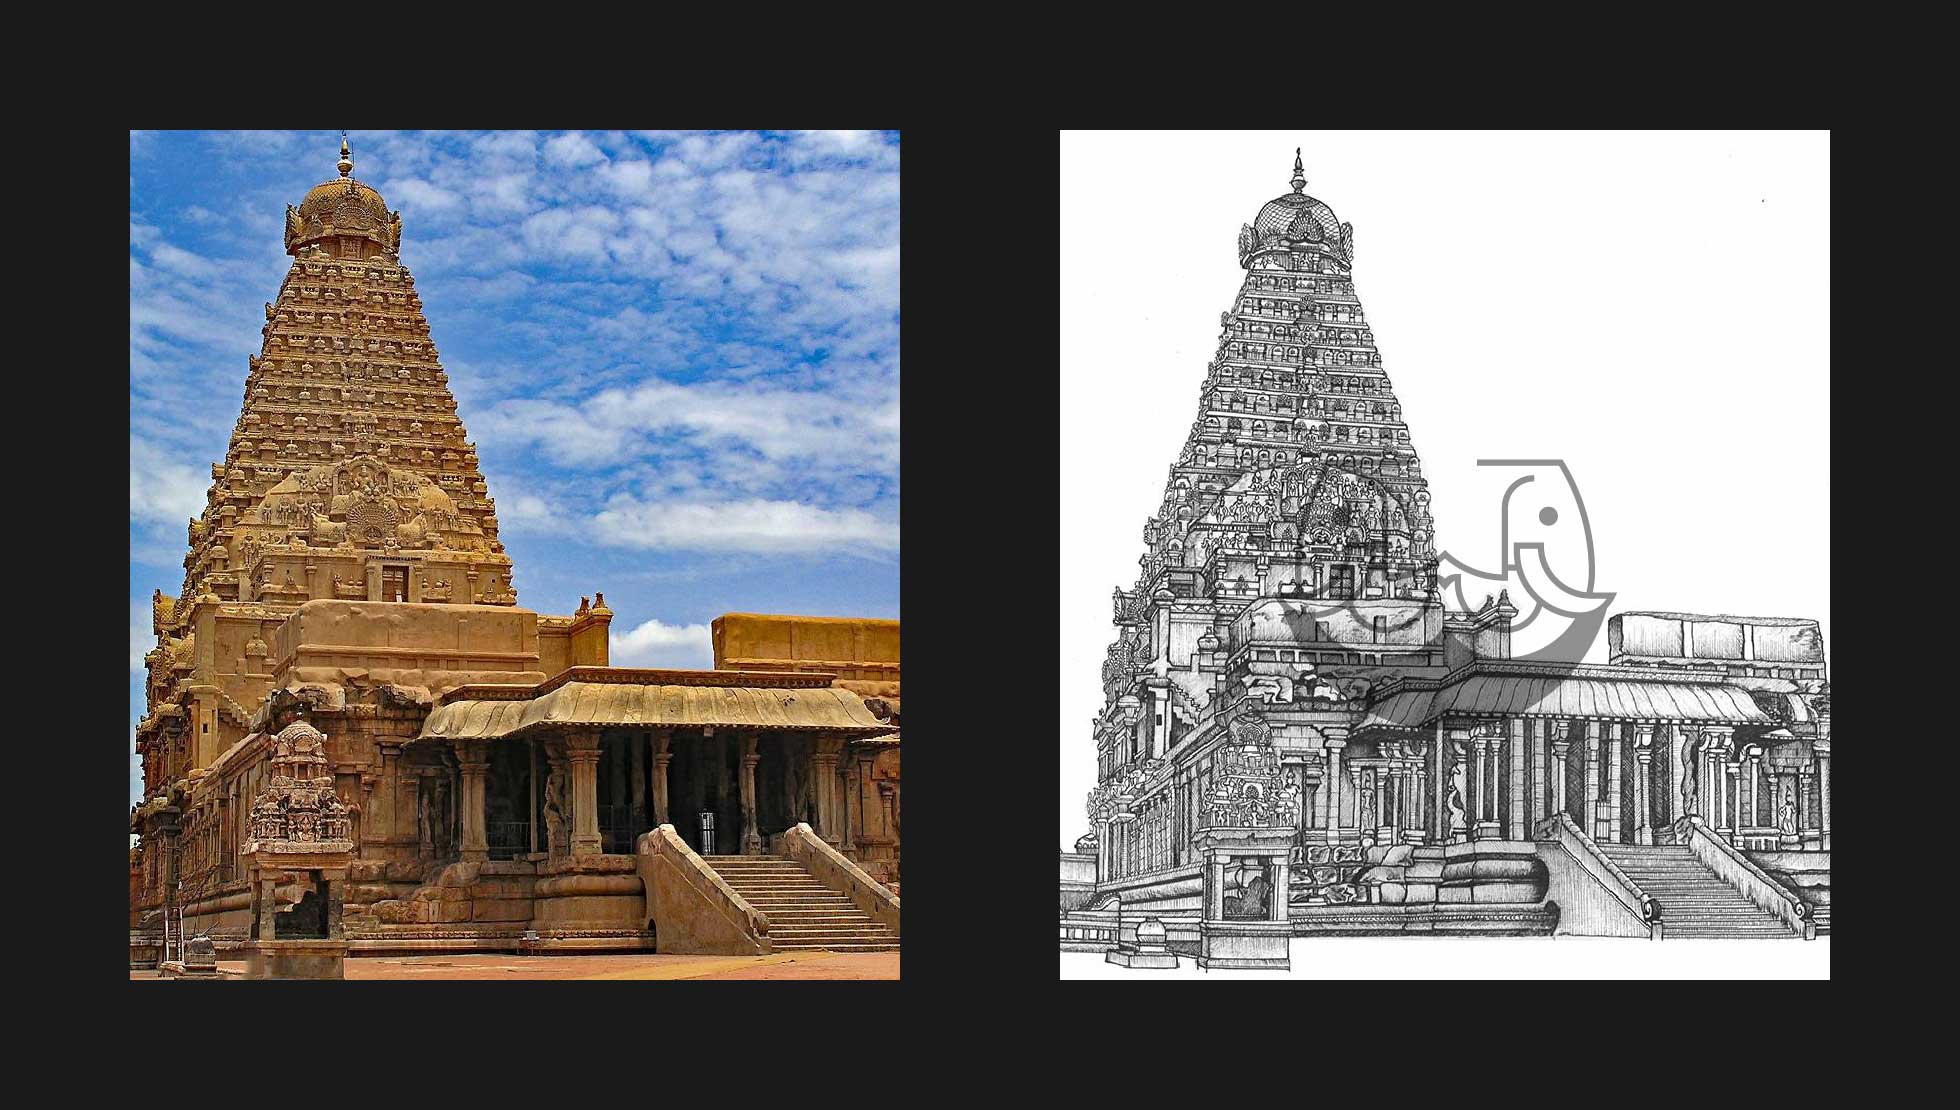 How to Draw - One point perspective - Thanjavur Temple - YouTube